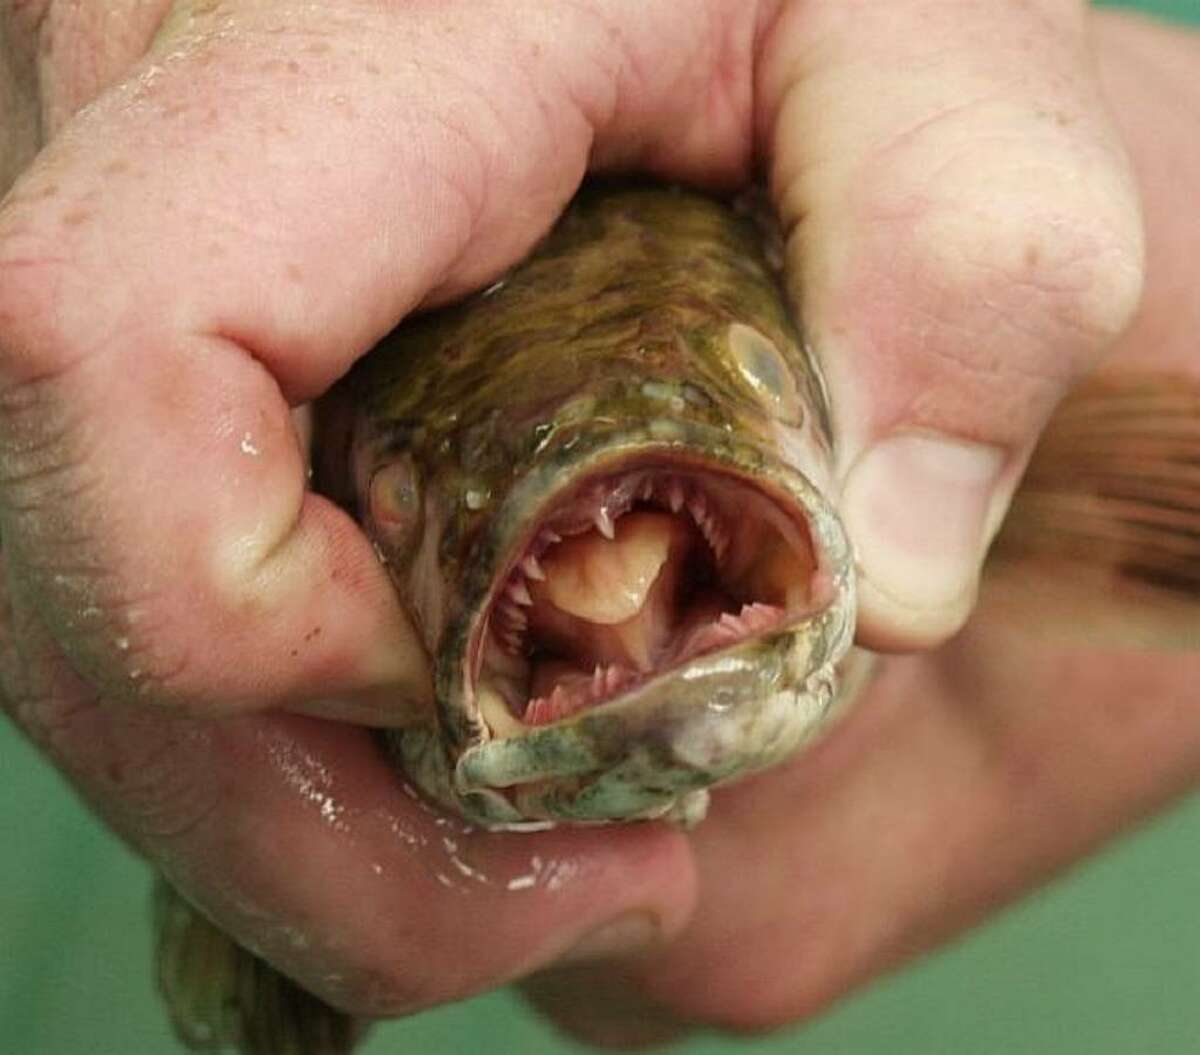 The northern snakehead is an Asian predator with no natural enemies, posing a threat to native species in state waters. The state Department of Environmental Conservation is poisoning an Orange County creek to kill the fish. (U.S. Geological Survey)